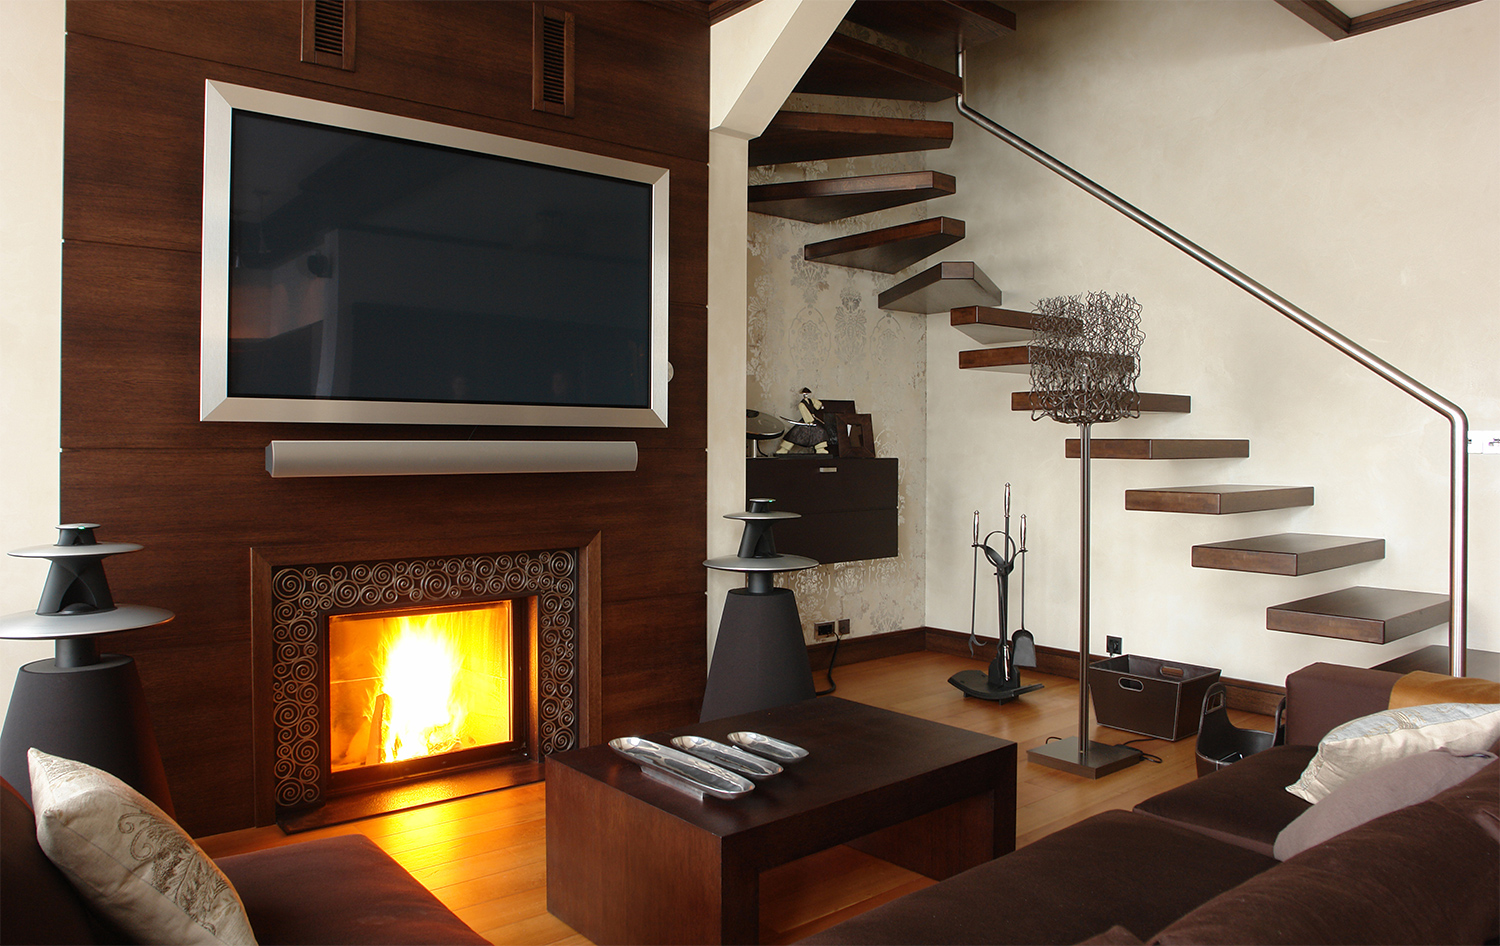 With TV above Fireplace Design Ideas